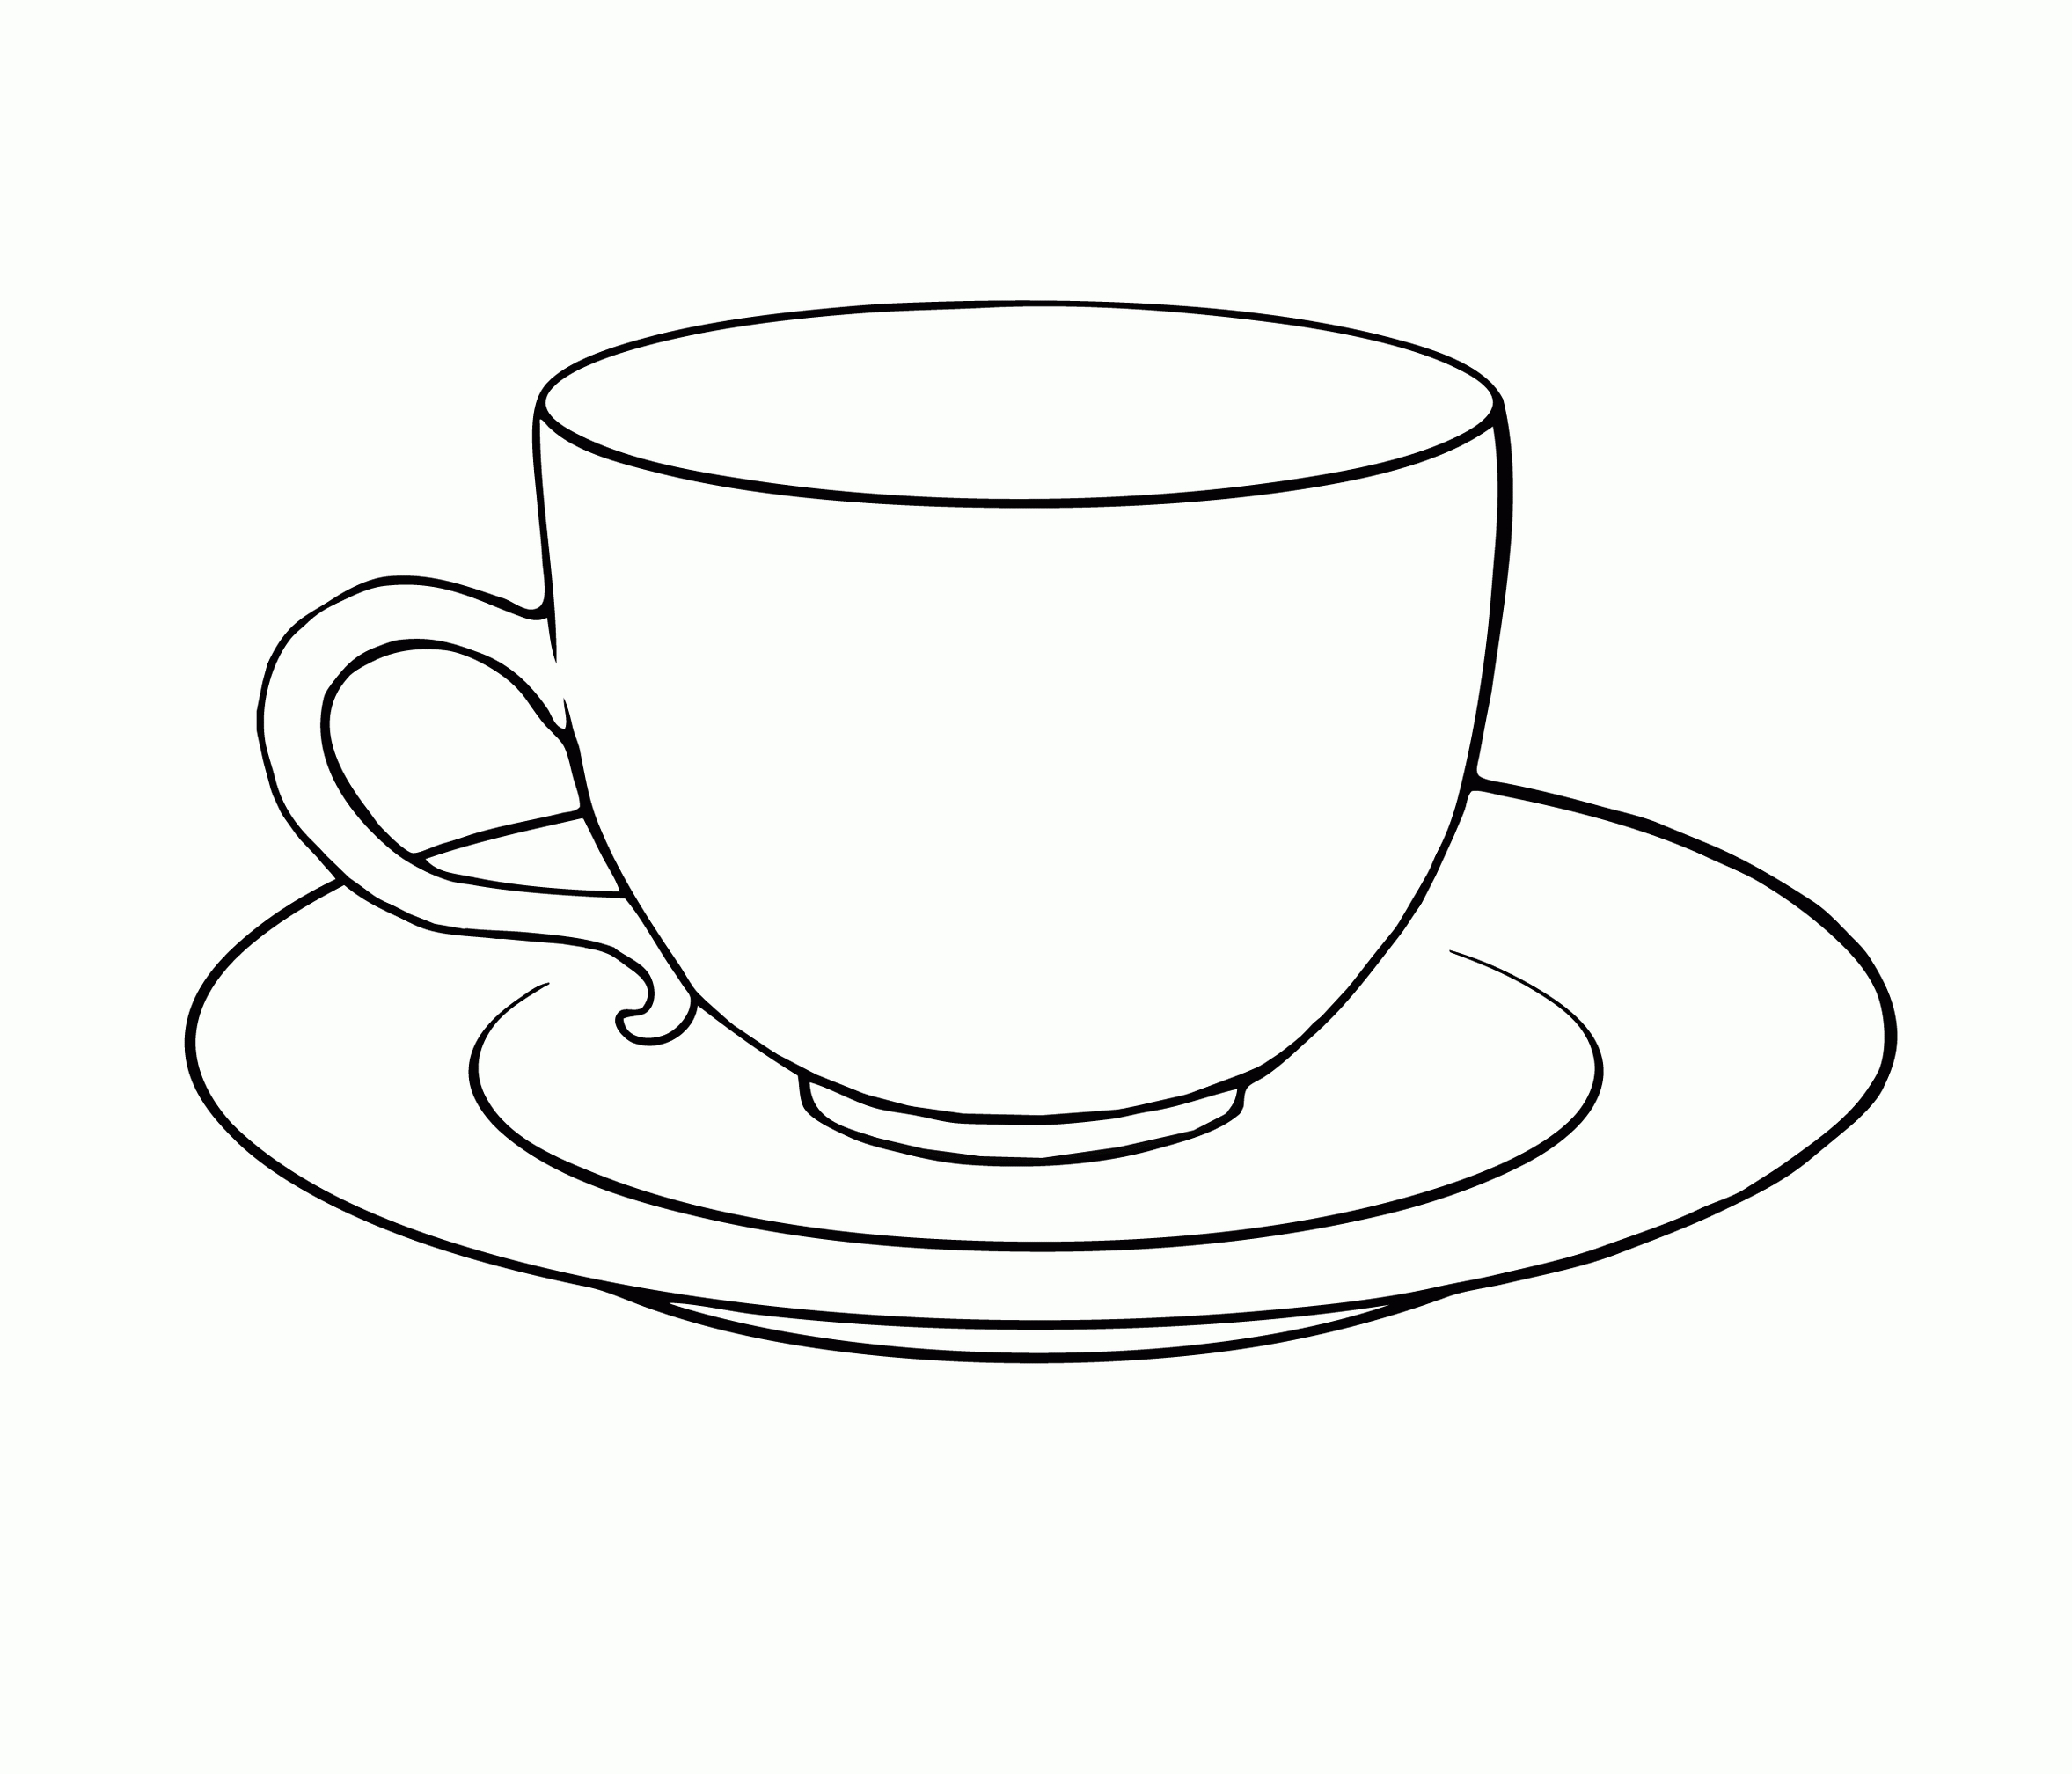 Teacup Coloring Pages To Print Teacup Coloring Page Coloring Home